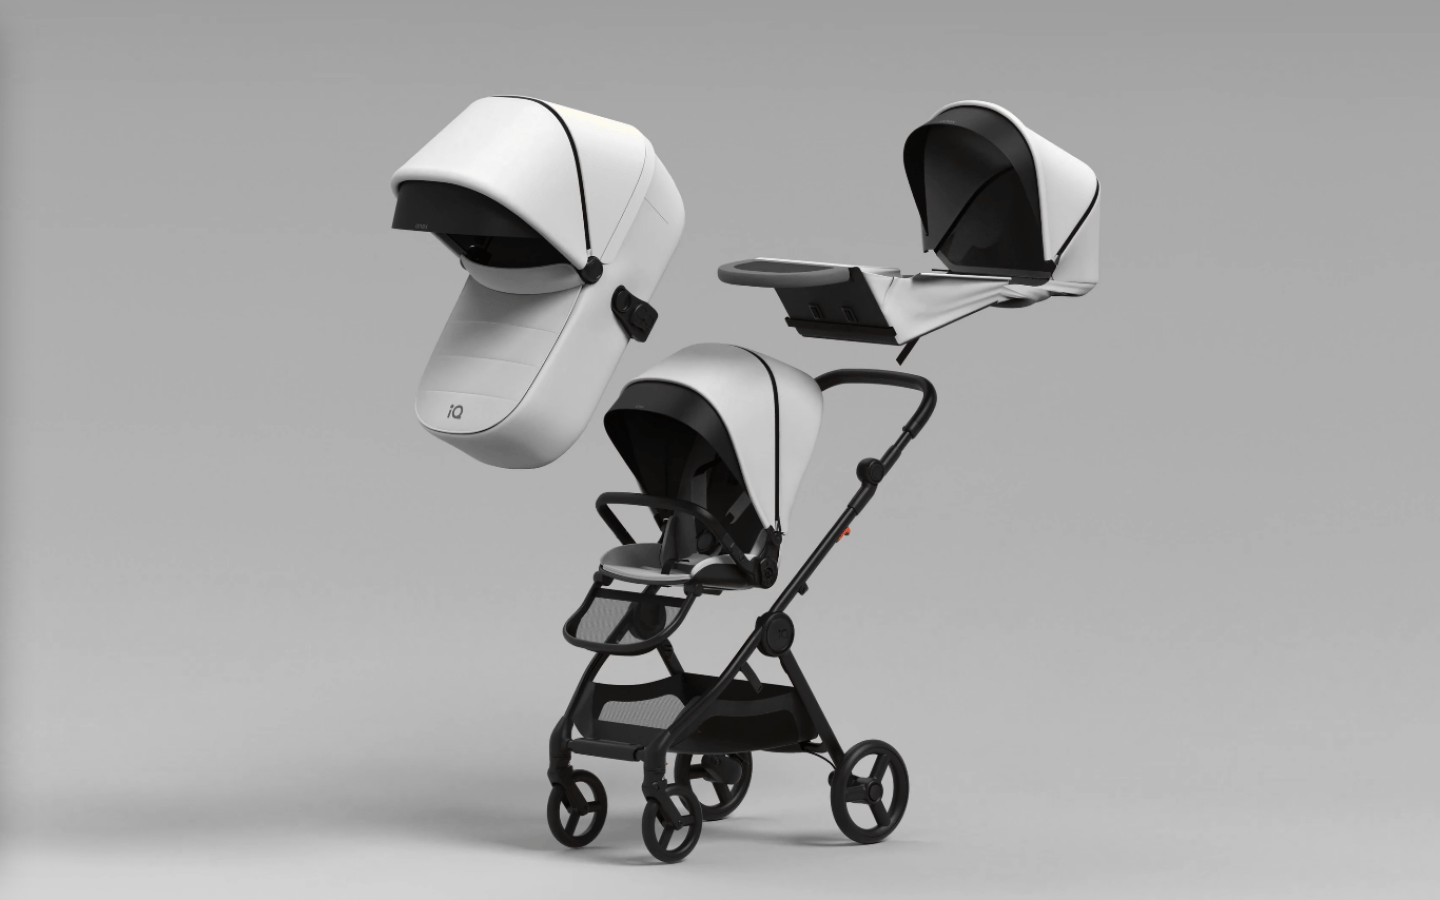 Introducing Anex Baby Stroller